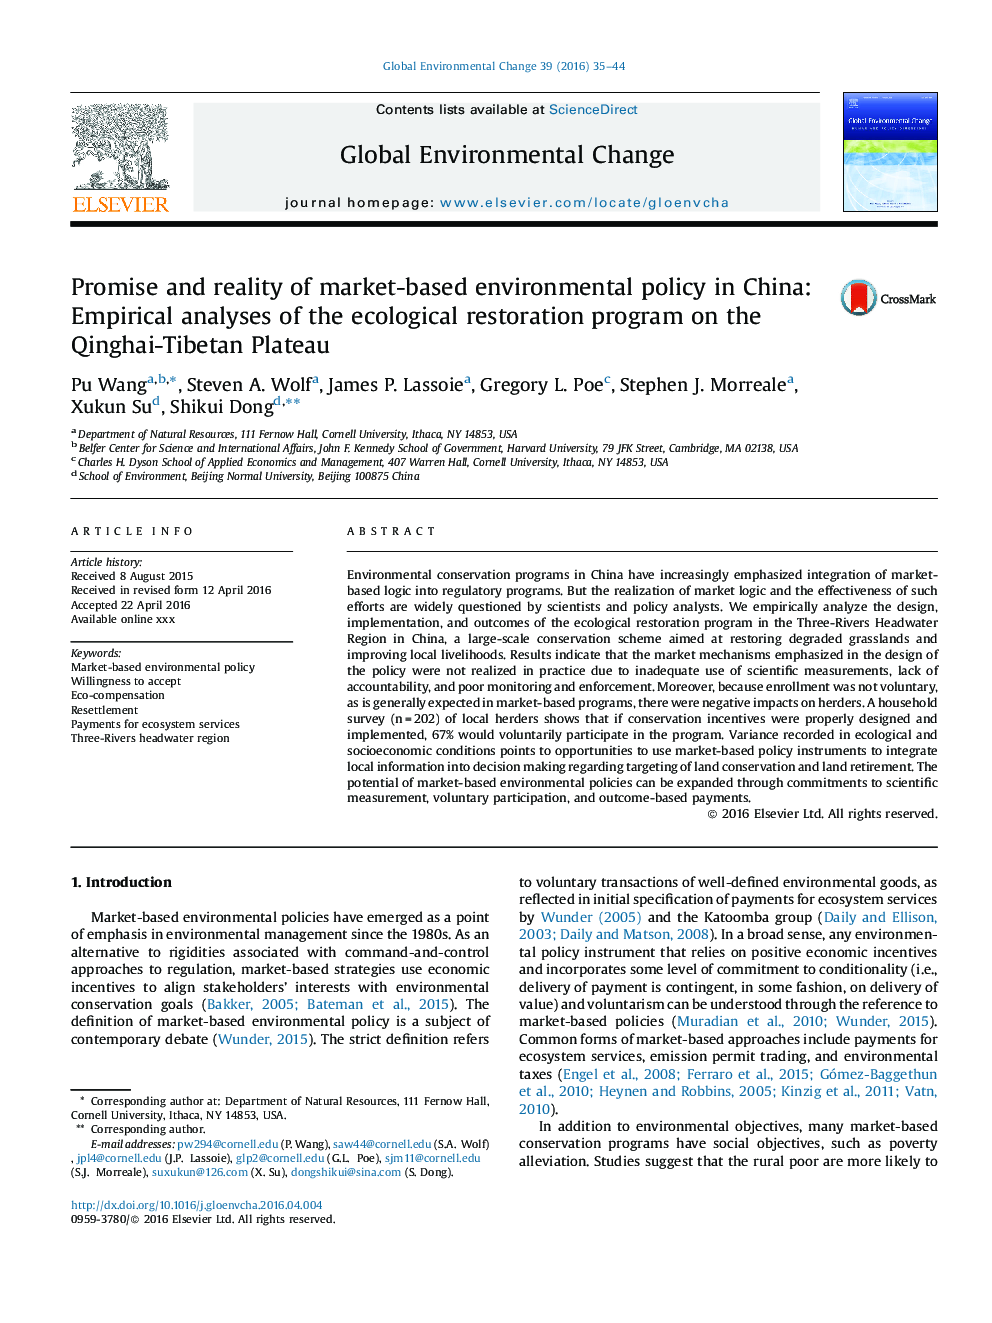 Promise and reality of market-based environmental policy in China: Empirical analyses of the ecological restoration program on the Qinghai-Tibetan Plateau